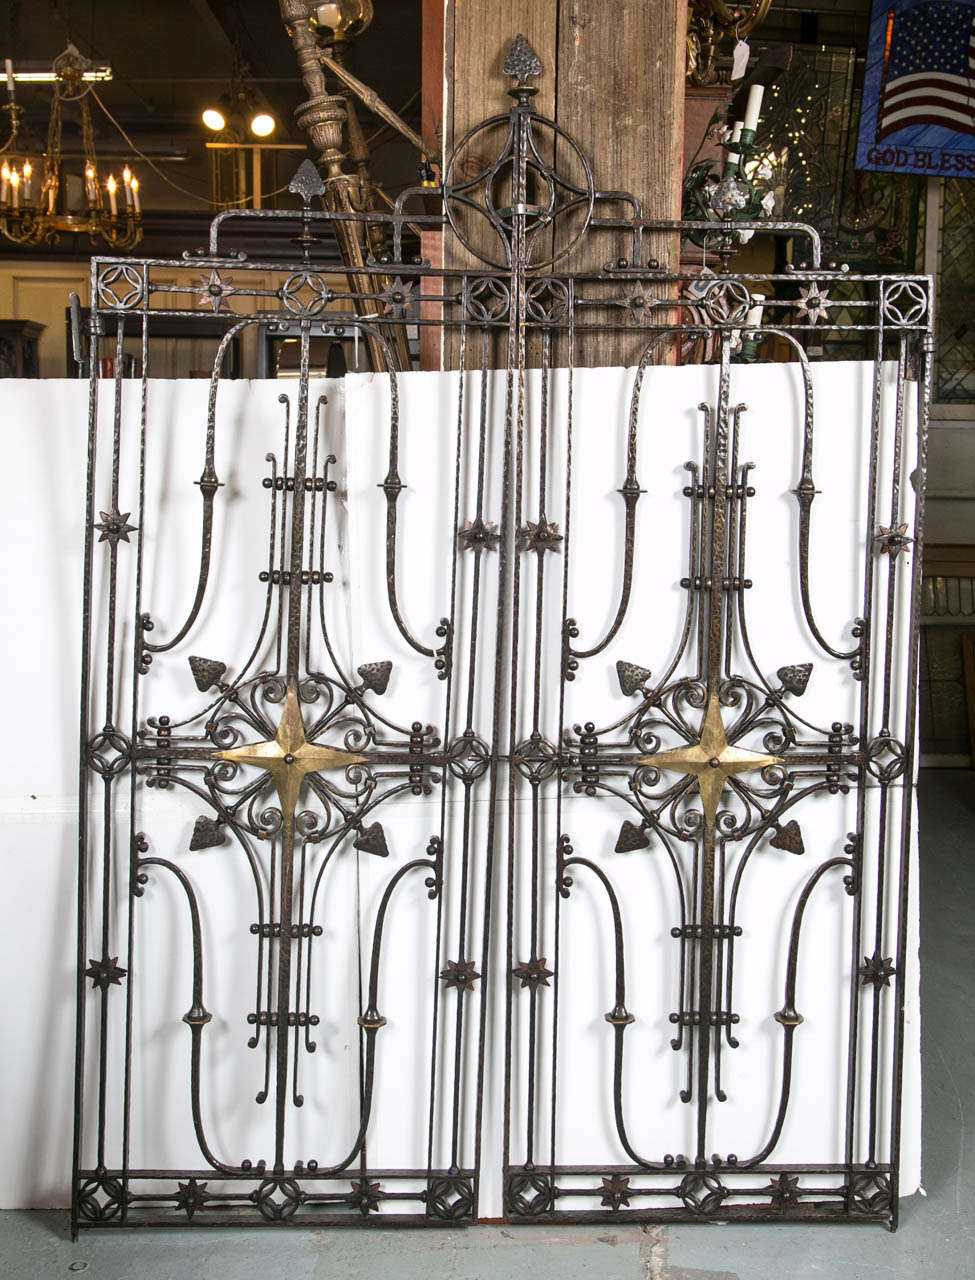 Architectural pair of star design wrought iron hand hammered gates. Have a flare of Tuscan Old World charm with a dash of medieval.  Gold tone star design and decorative scroll work at the middle of the gates make these unique gates special. Great